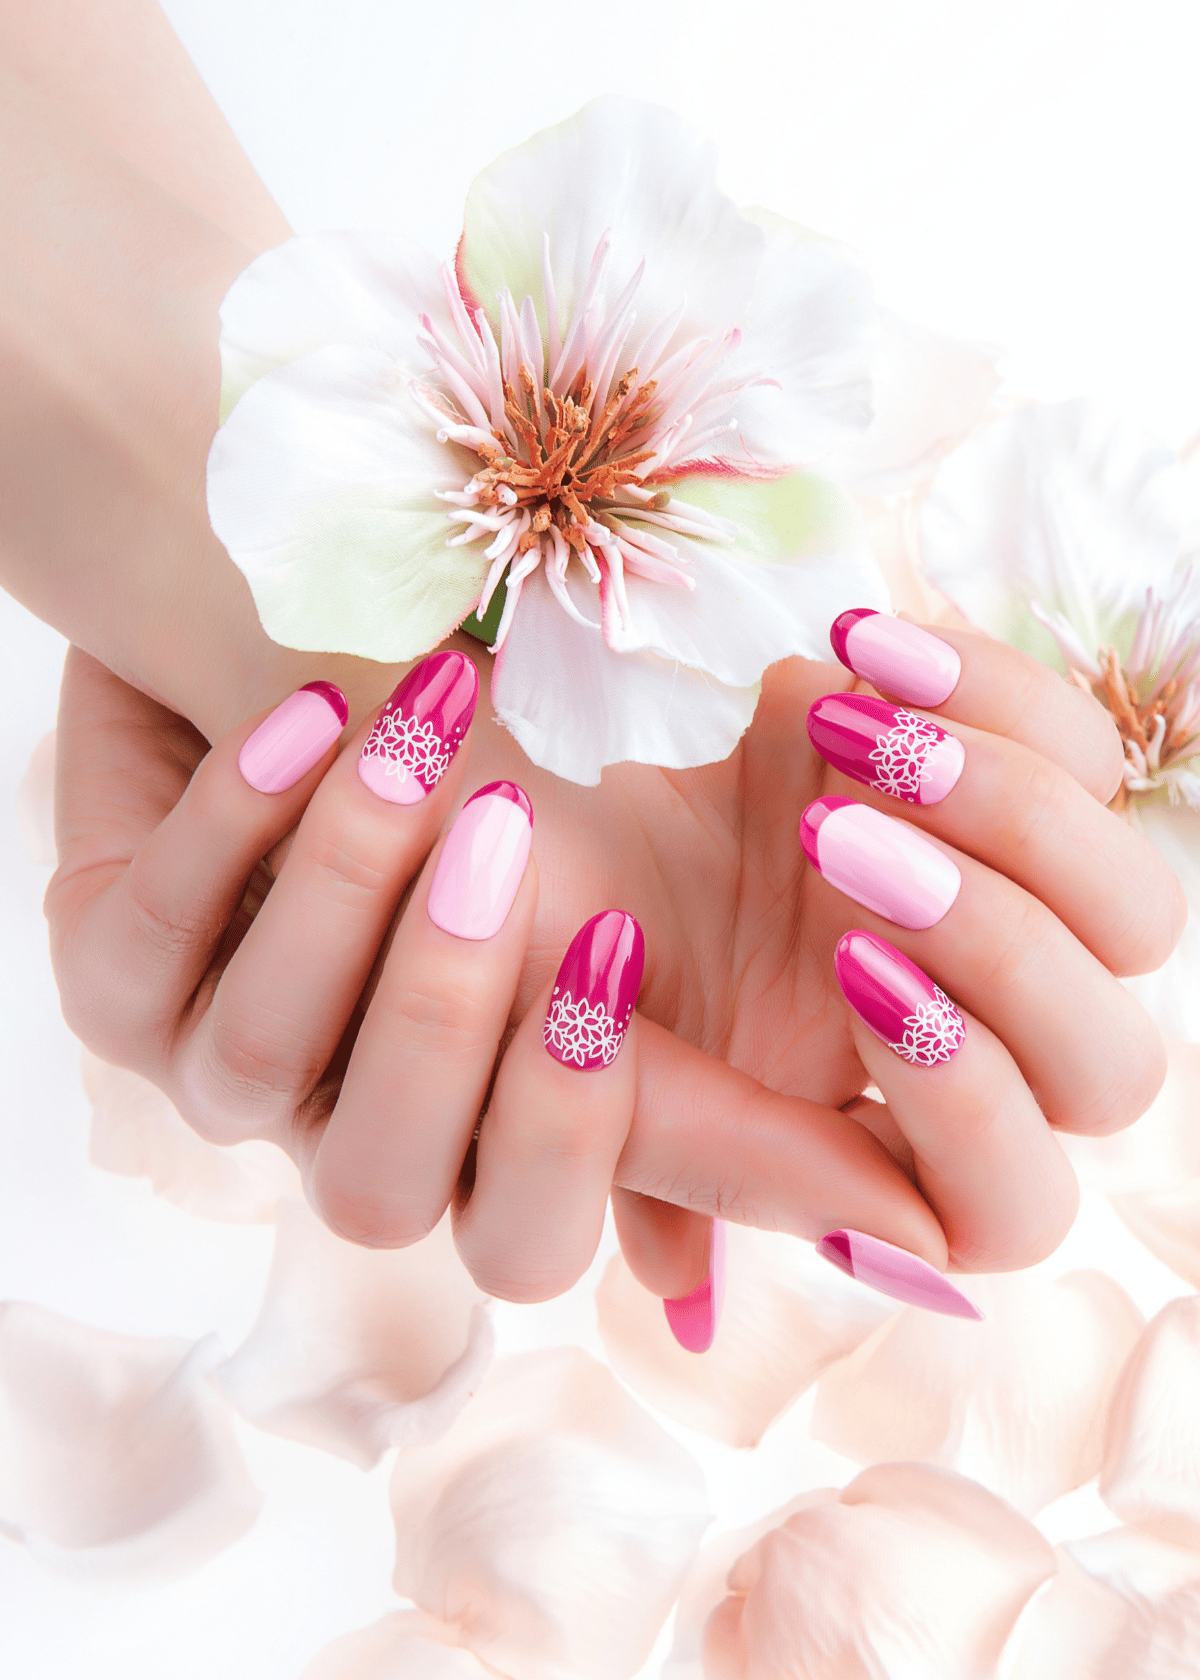 Everything You Need to Know About Using Nail Polish for Stamping